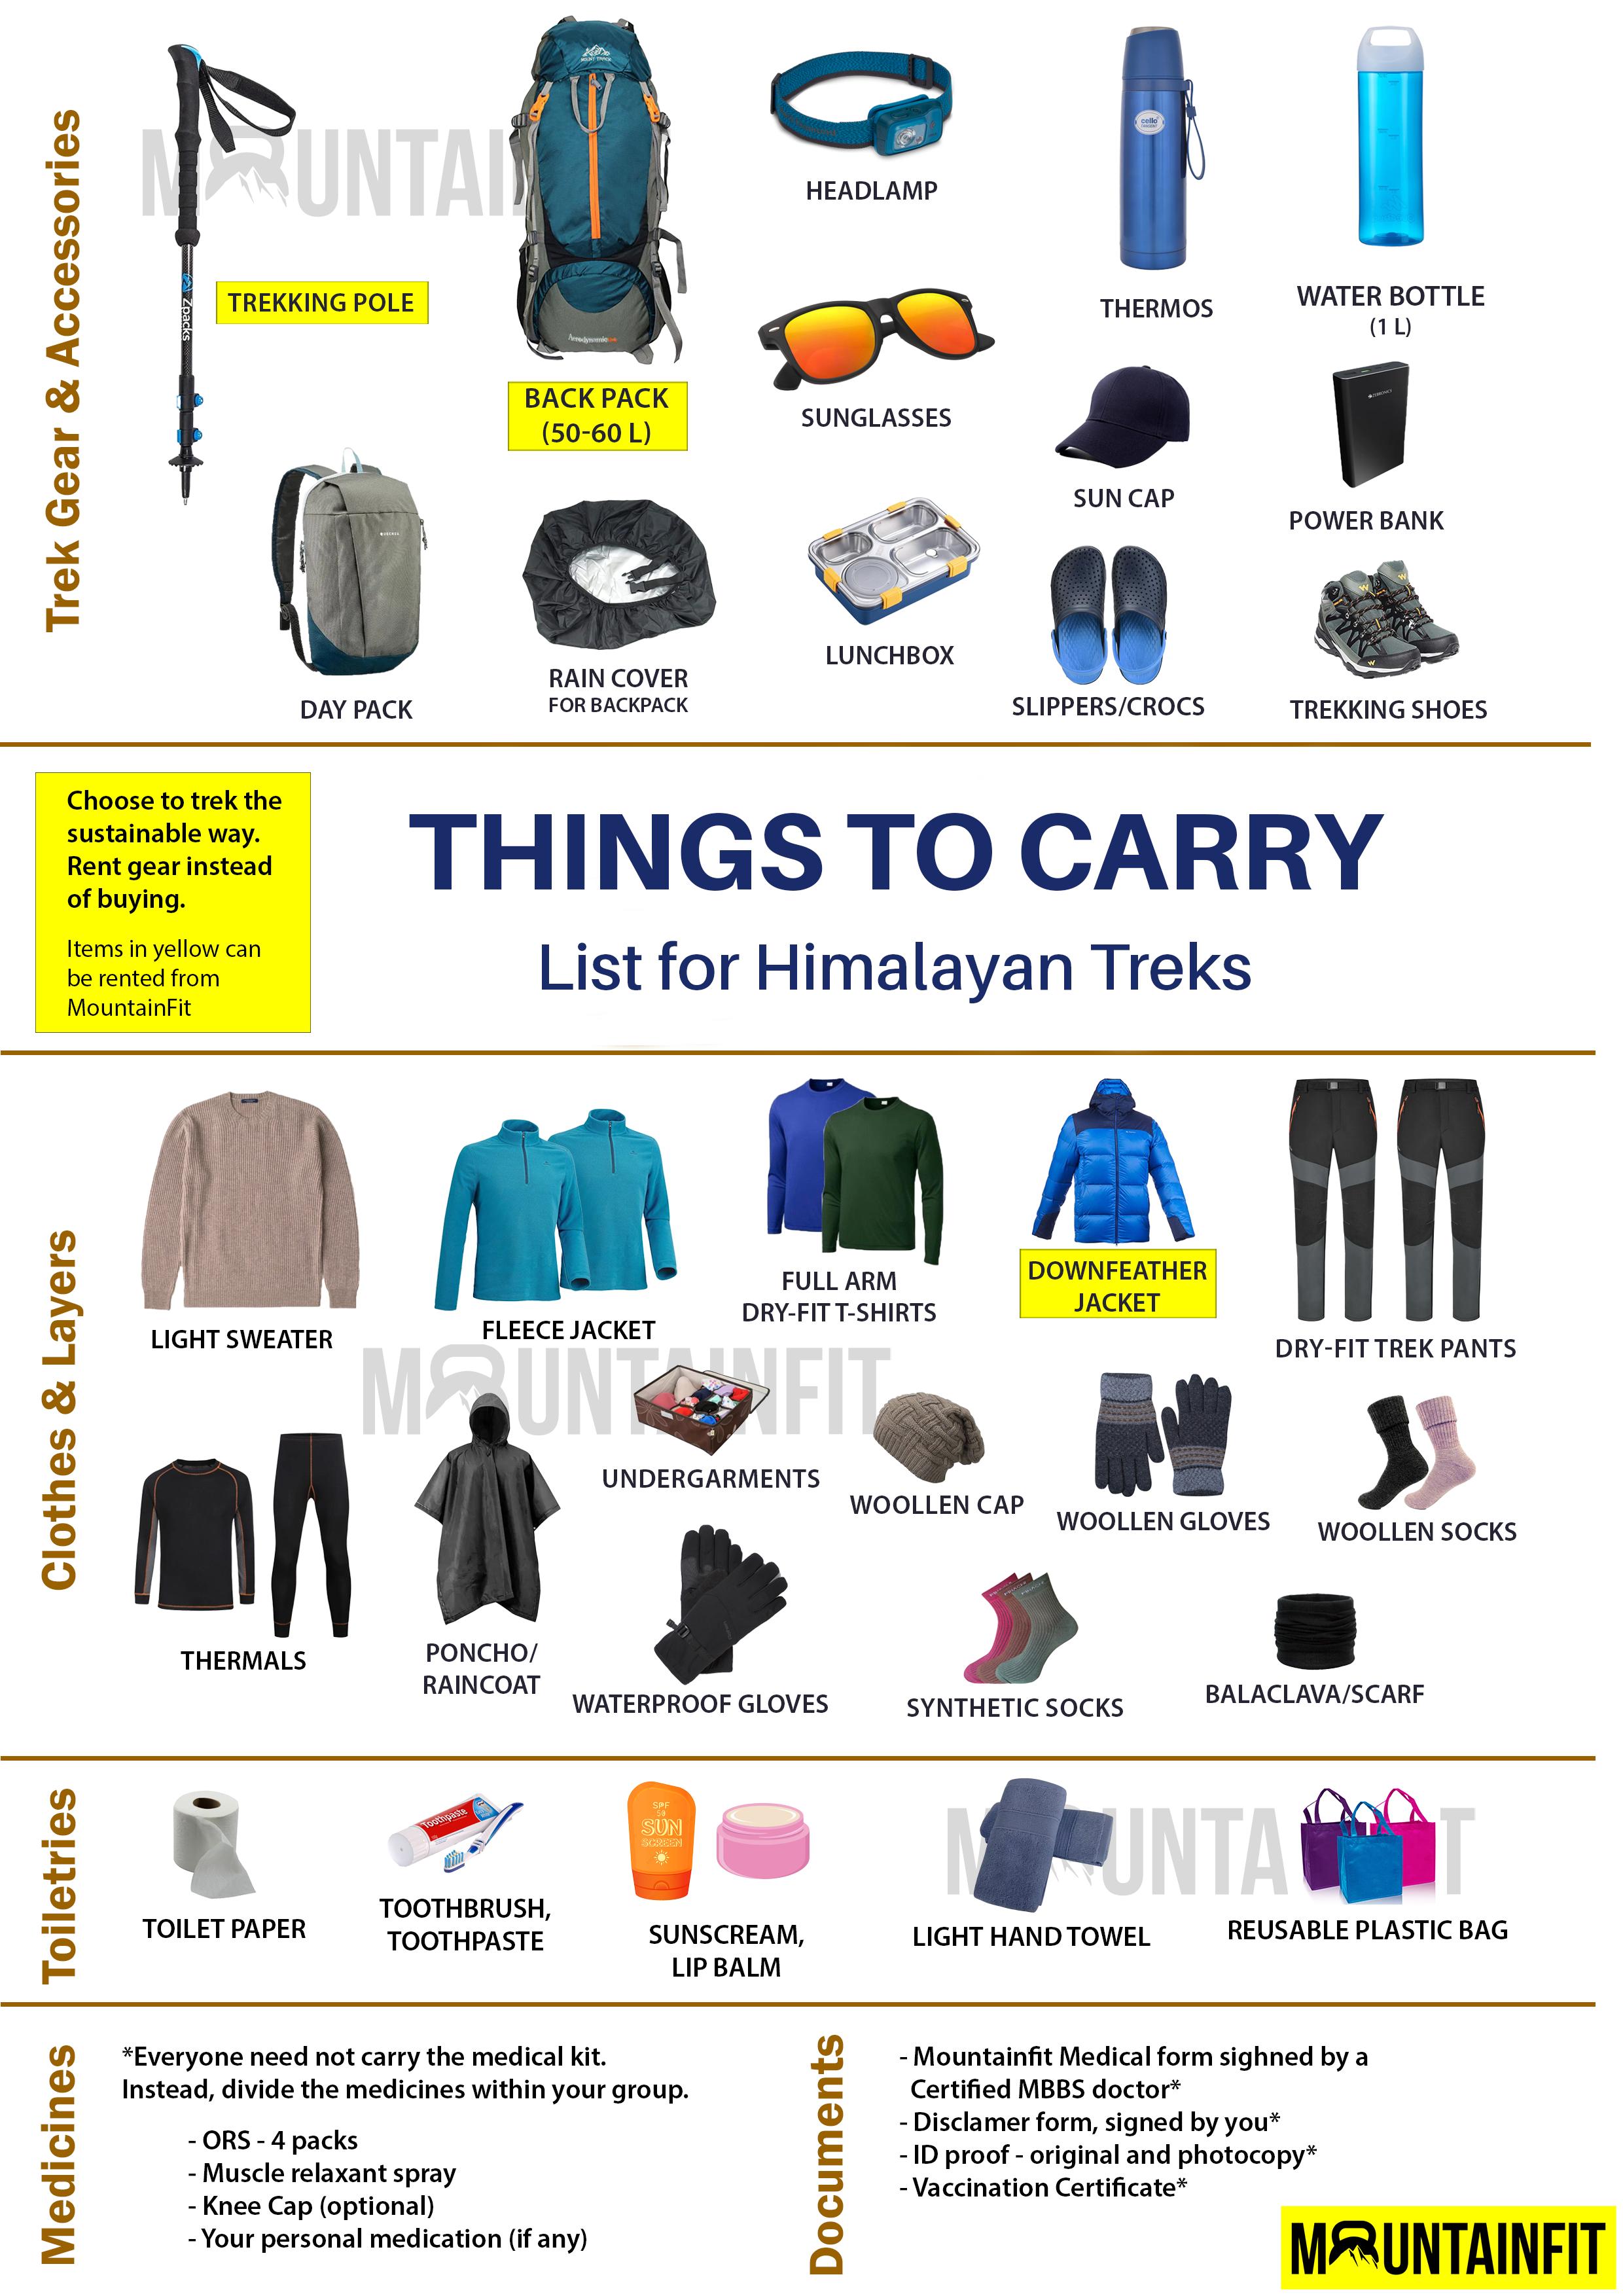 List of things to carry for Himlayan Trek